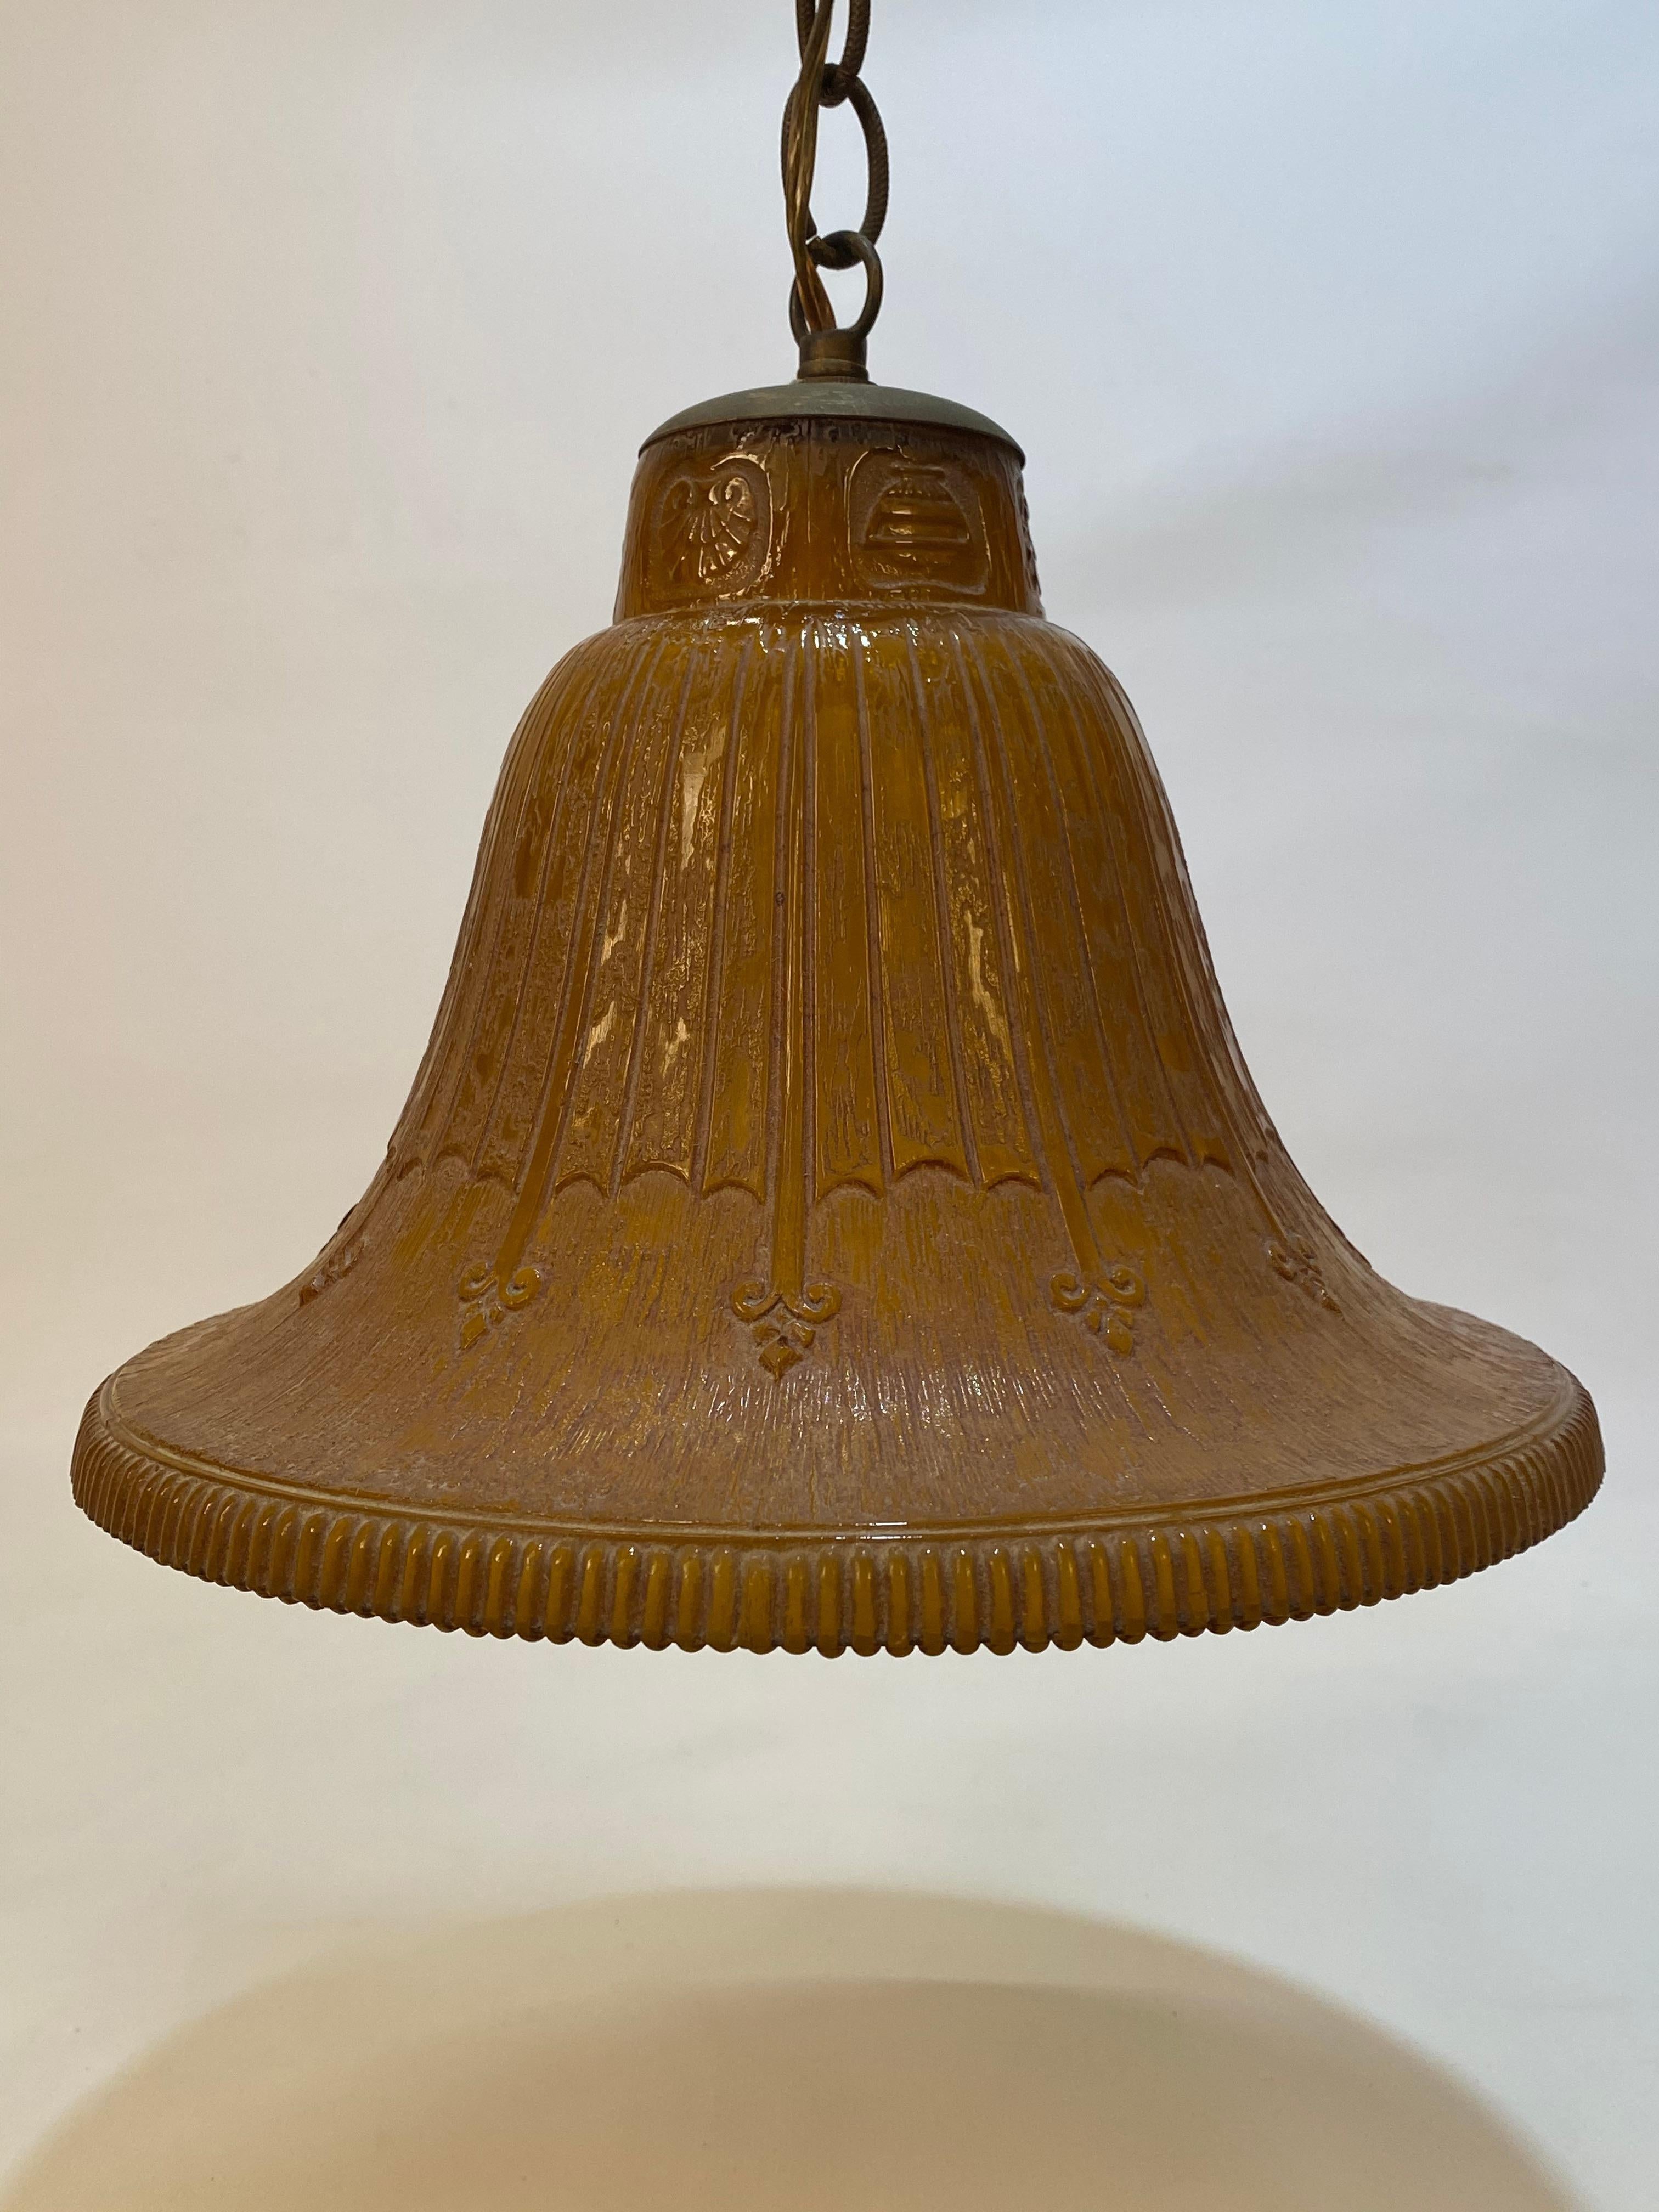 Art Deco period amber glass bell pendant light. Cast mold glass shade decorated with a spade and ribbon design. Ribbed edge. The shade is in very good condition with one minor ding to the edge (very difficult to see).

Measures: Approximately